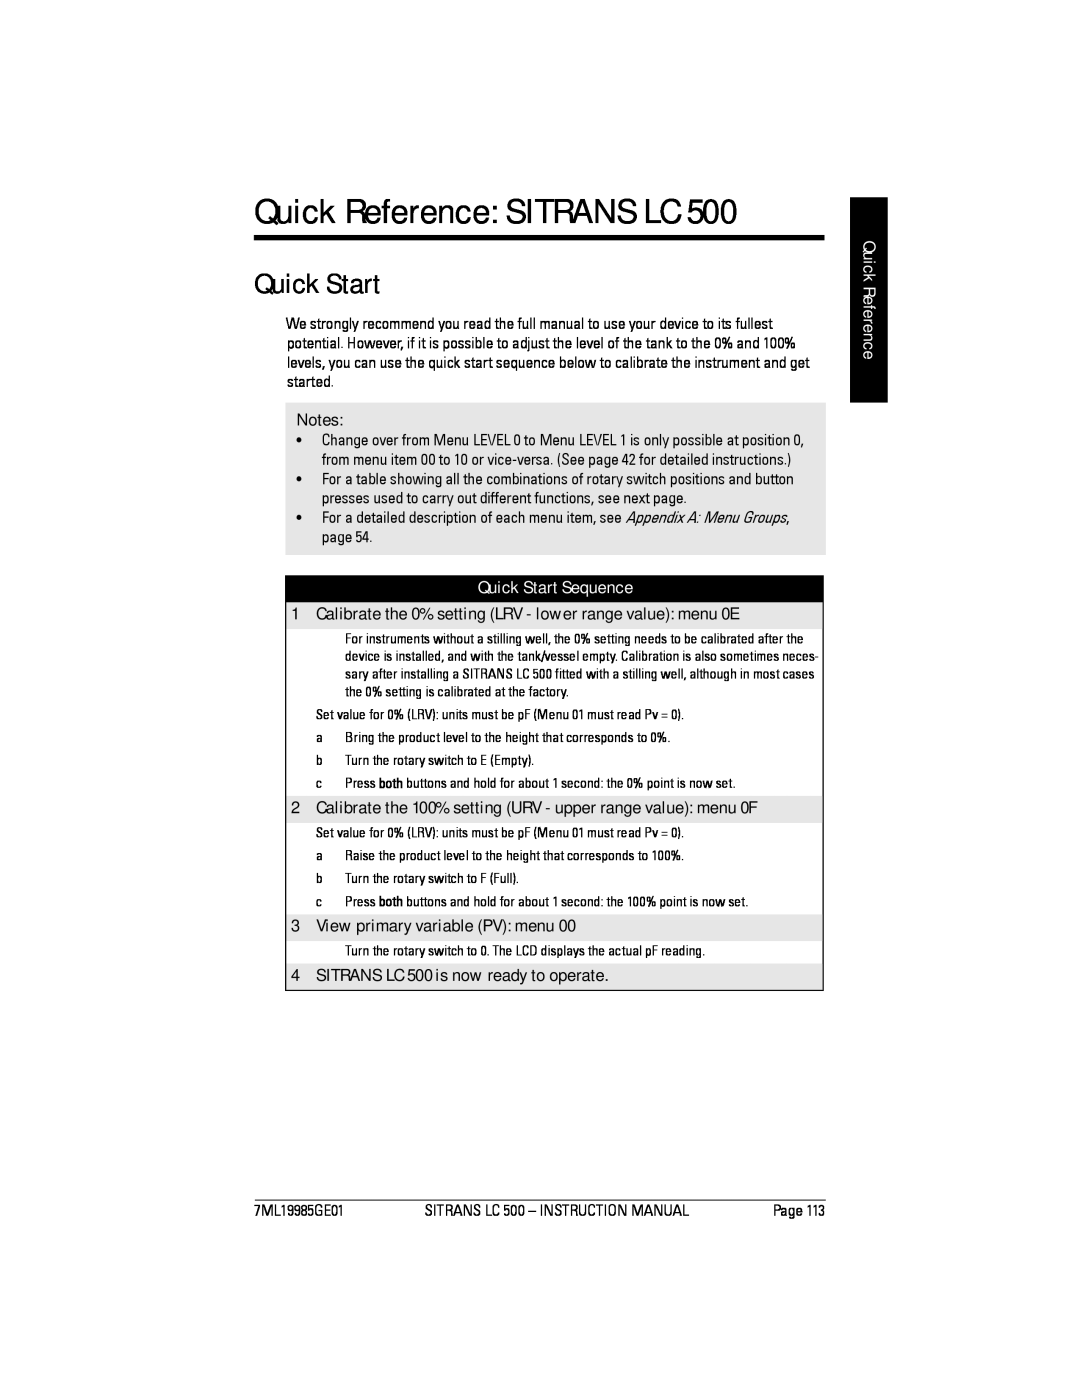 Siemens Sitrans, LC 500 instruction manual Quick Reference SITRANS LC, Quick Start Sequence 